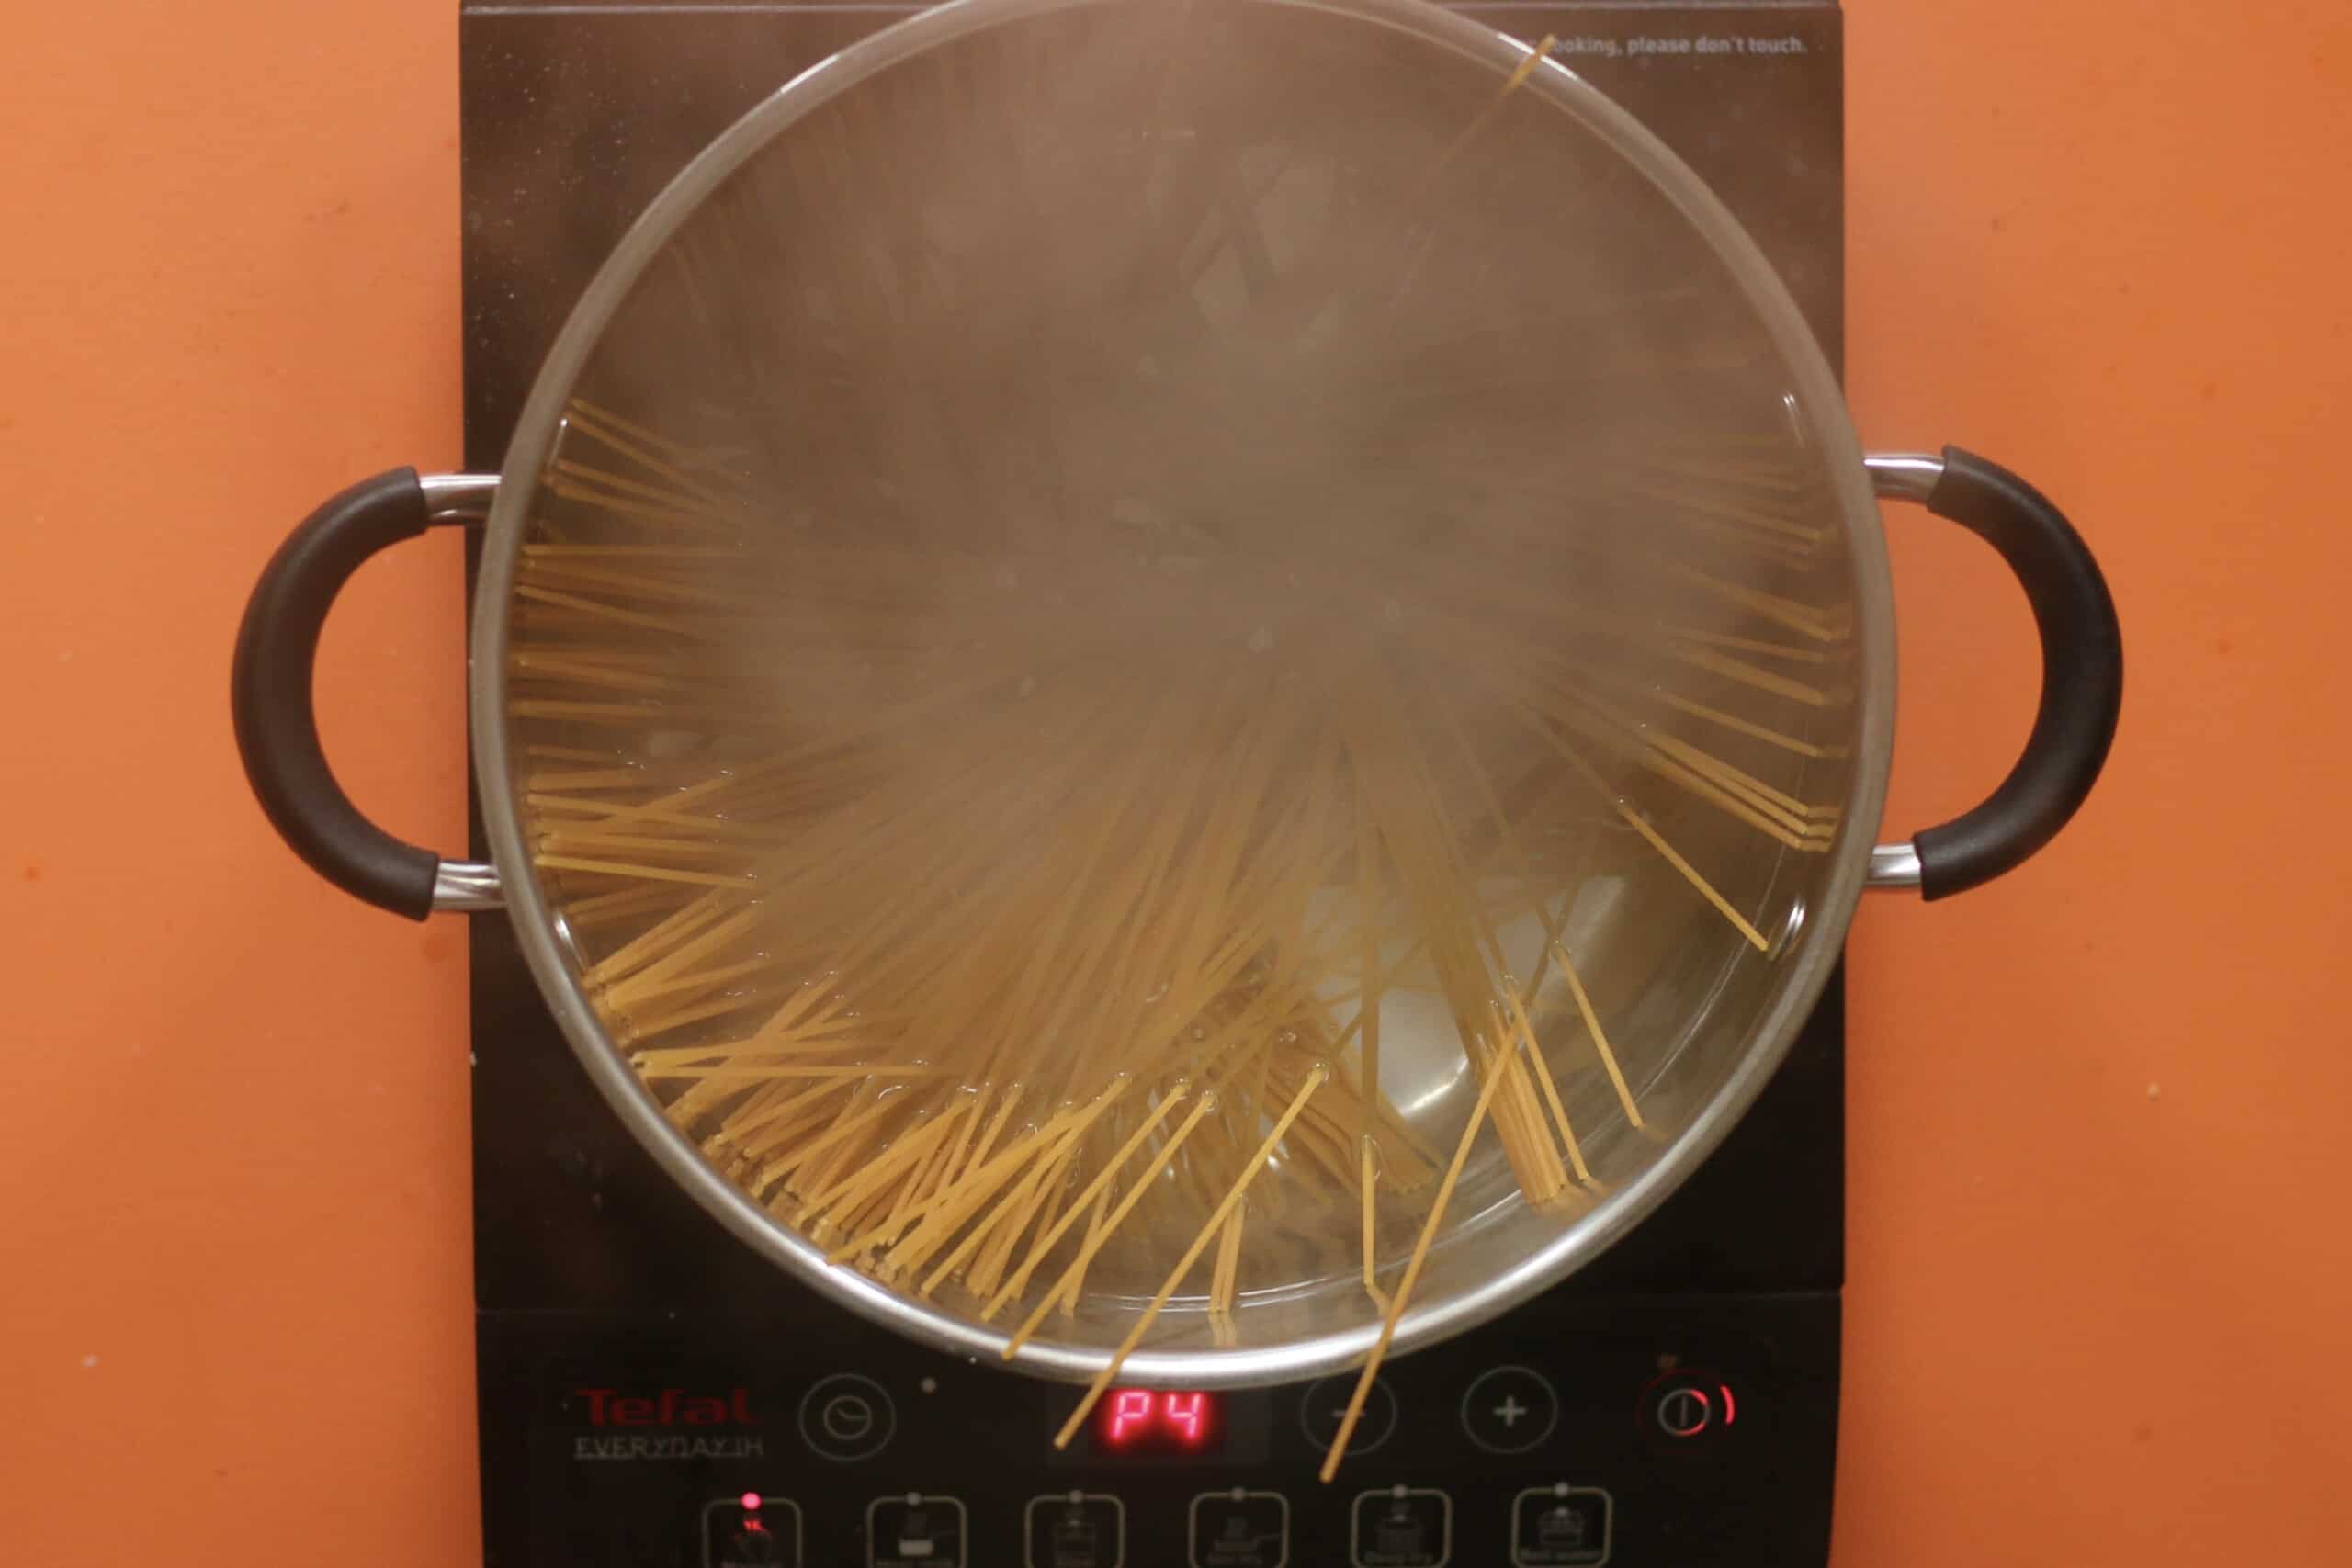 Dry spaghetti in  boiling water in a large saucepan on a stove on an orange background.